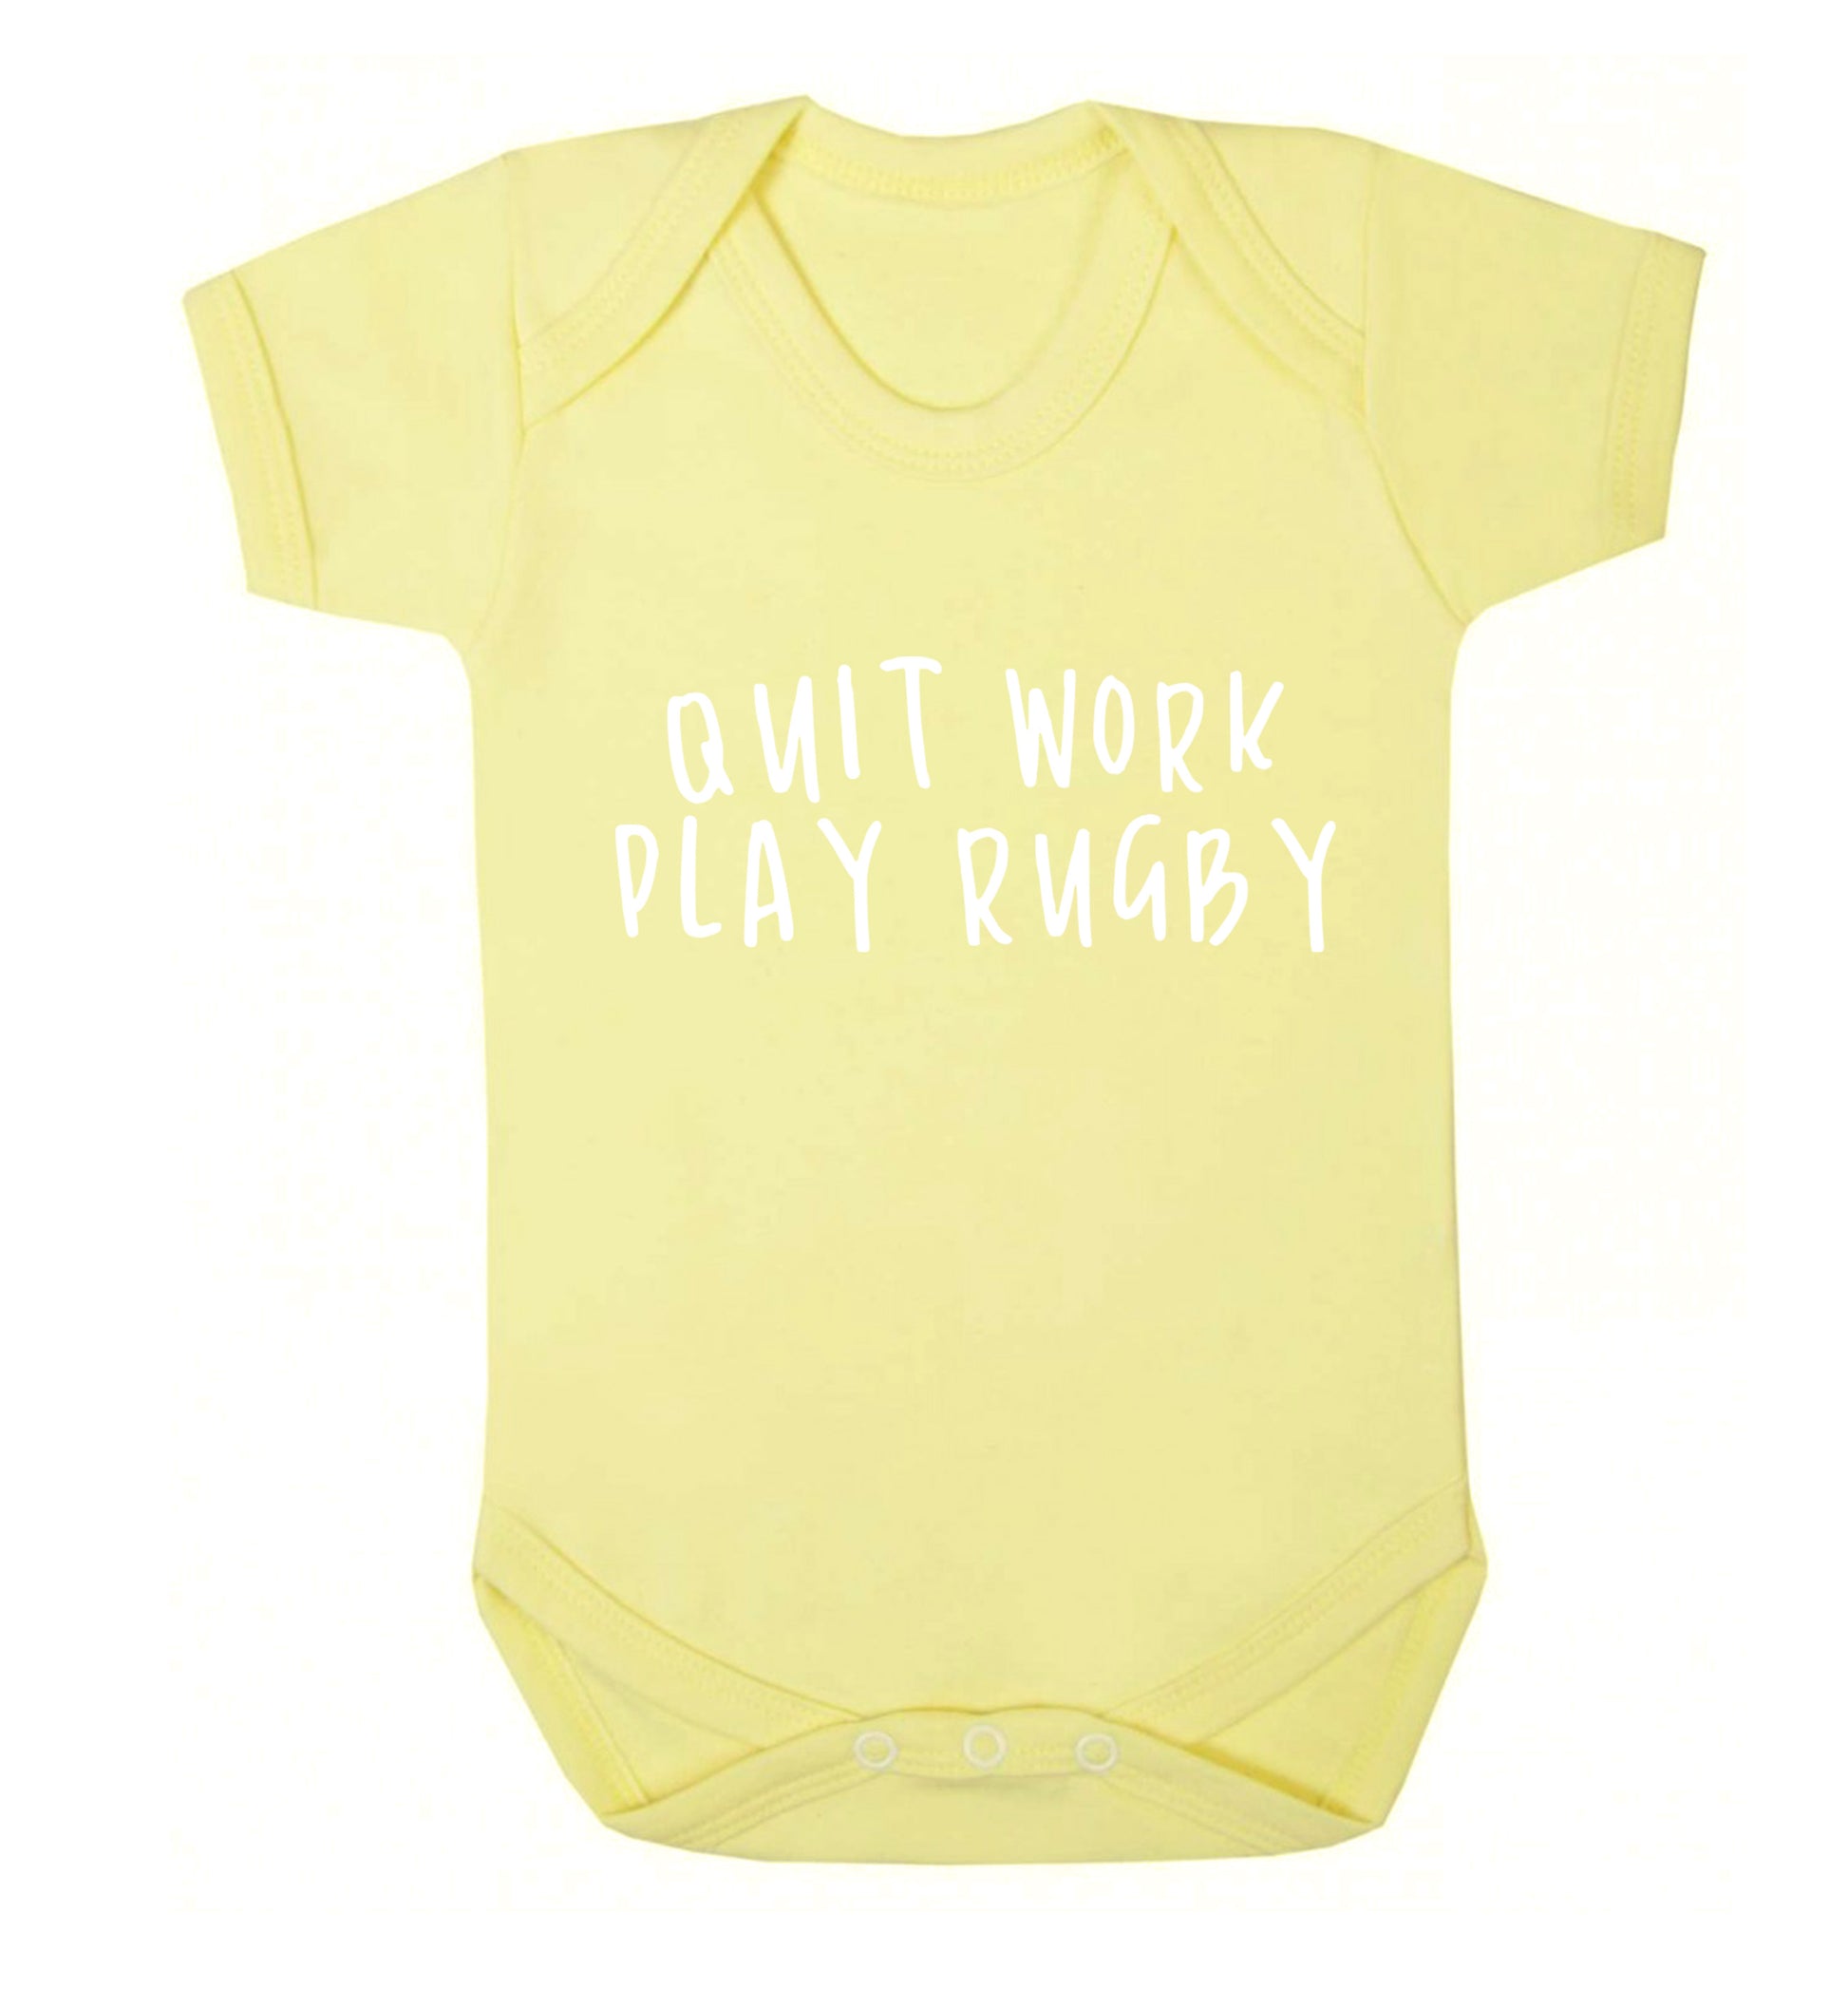 Quit work play rugby Baby Vest pale yellow 18-24 months